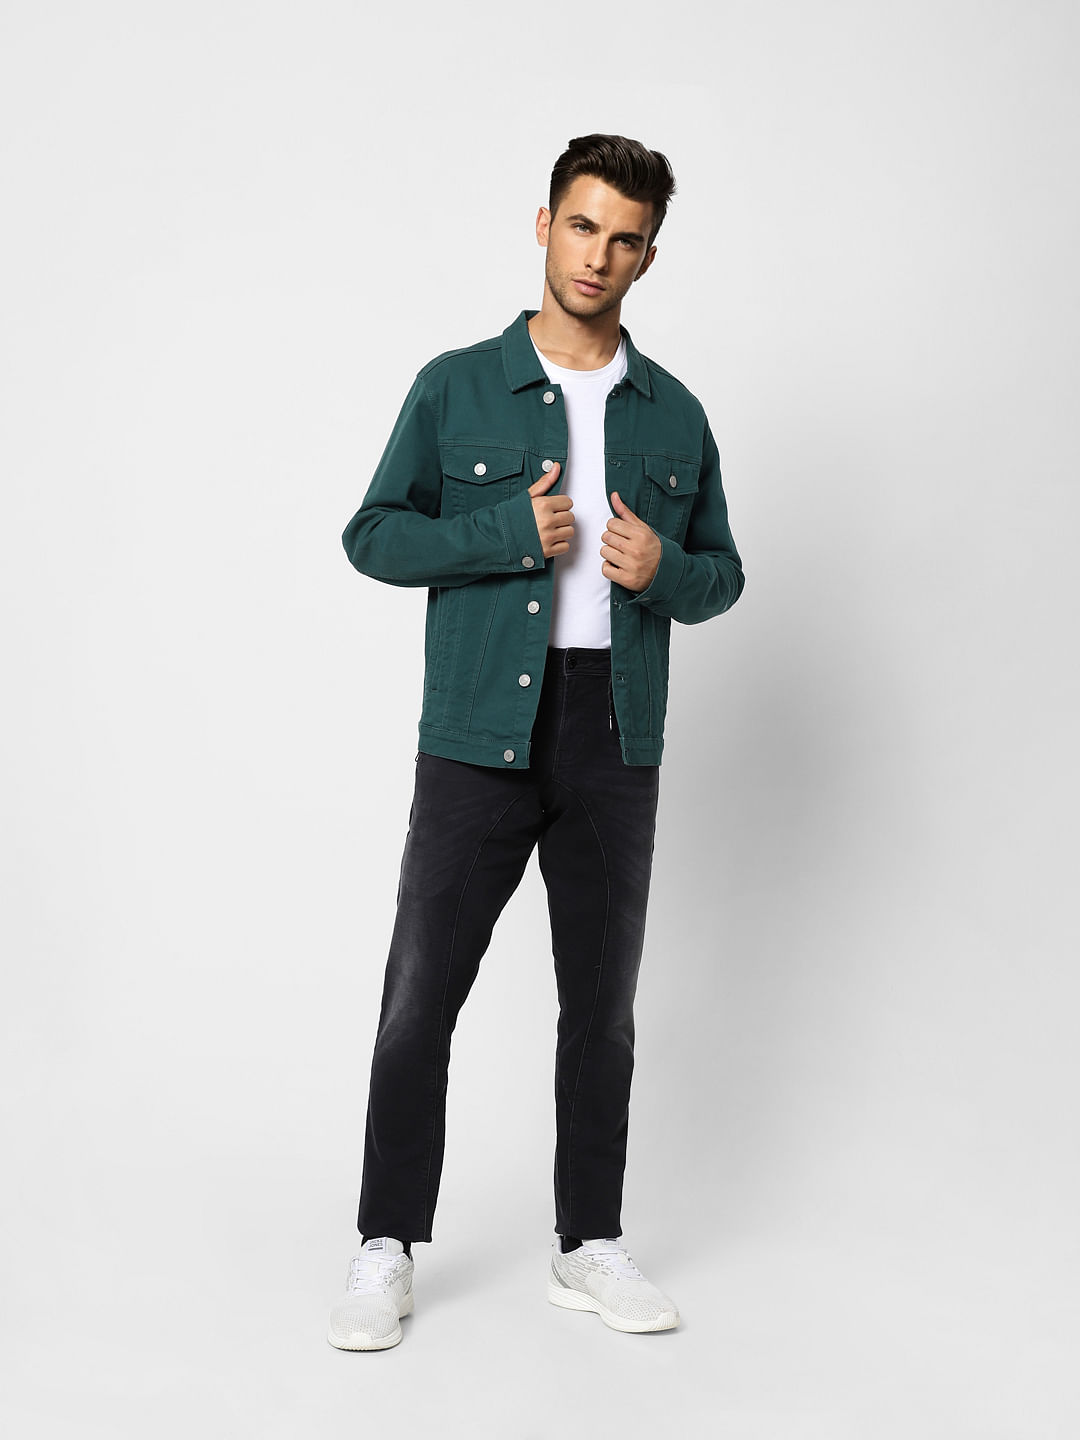 Charcoal Jeans with Dark Green Denim Jacket Outfits For Men (4 ideas &  outfits) | Lookastic